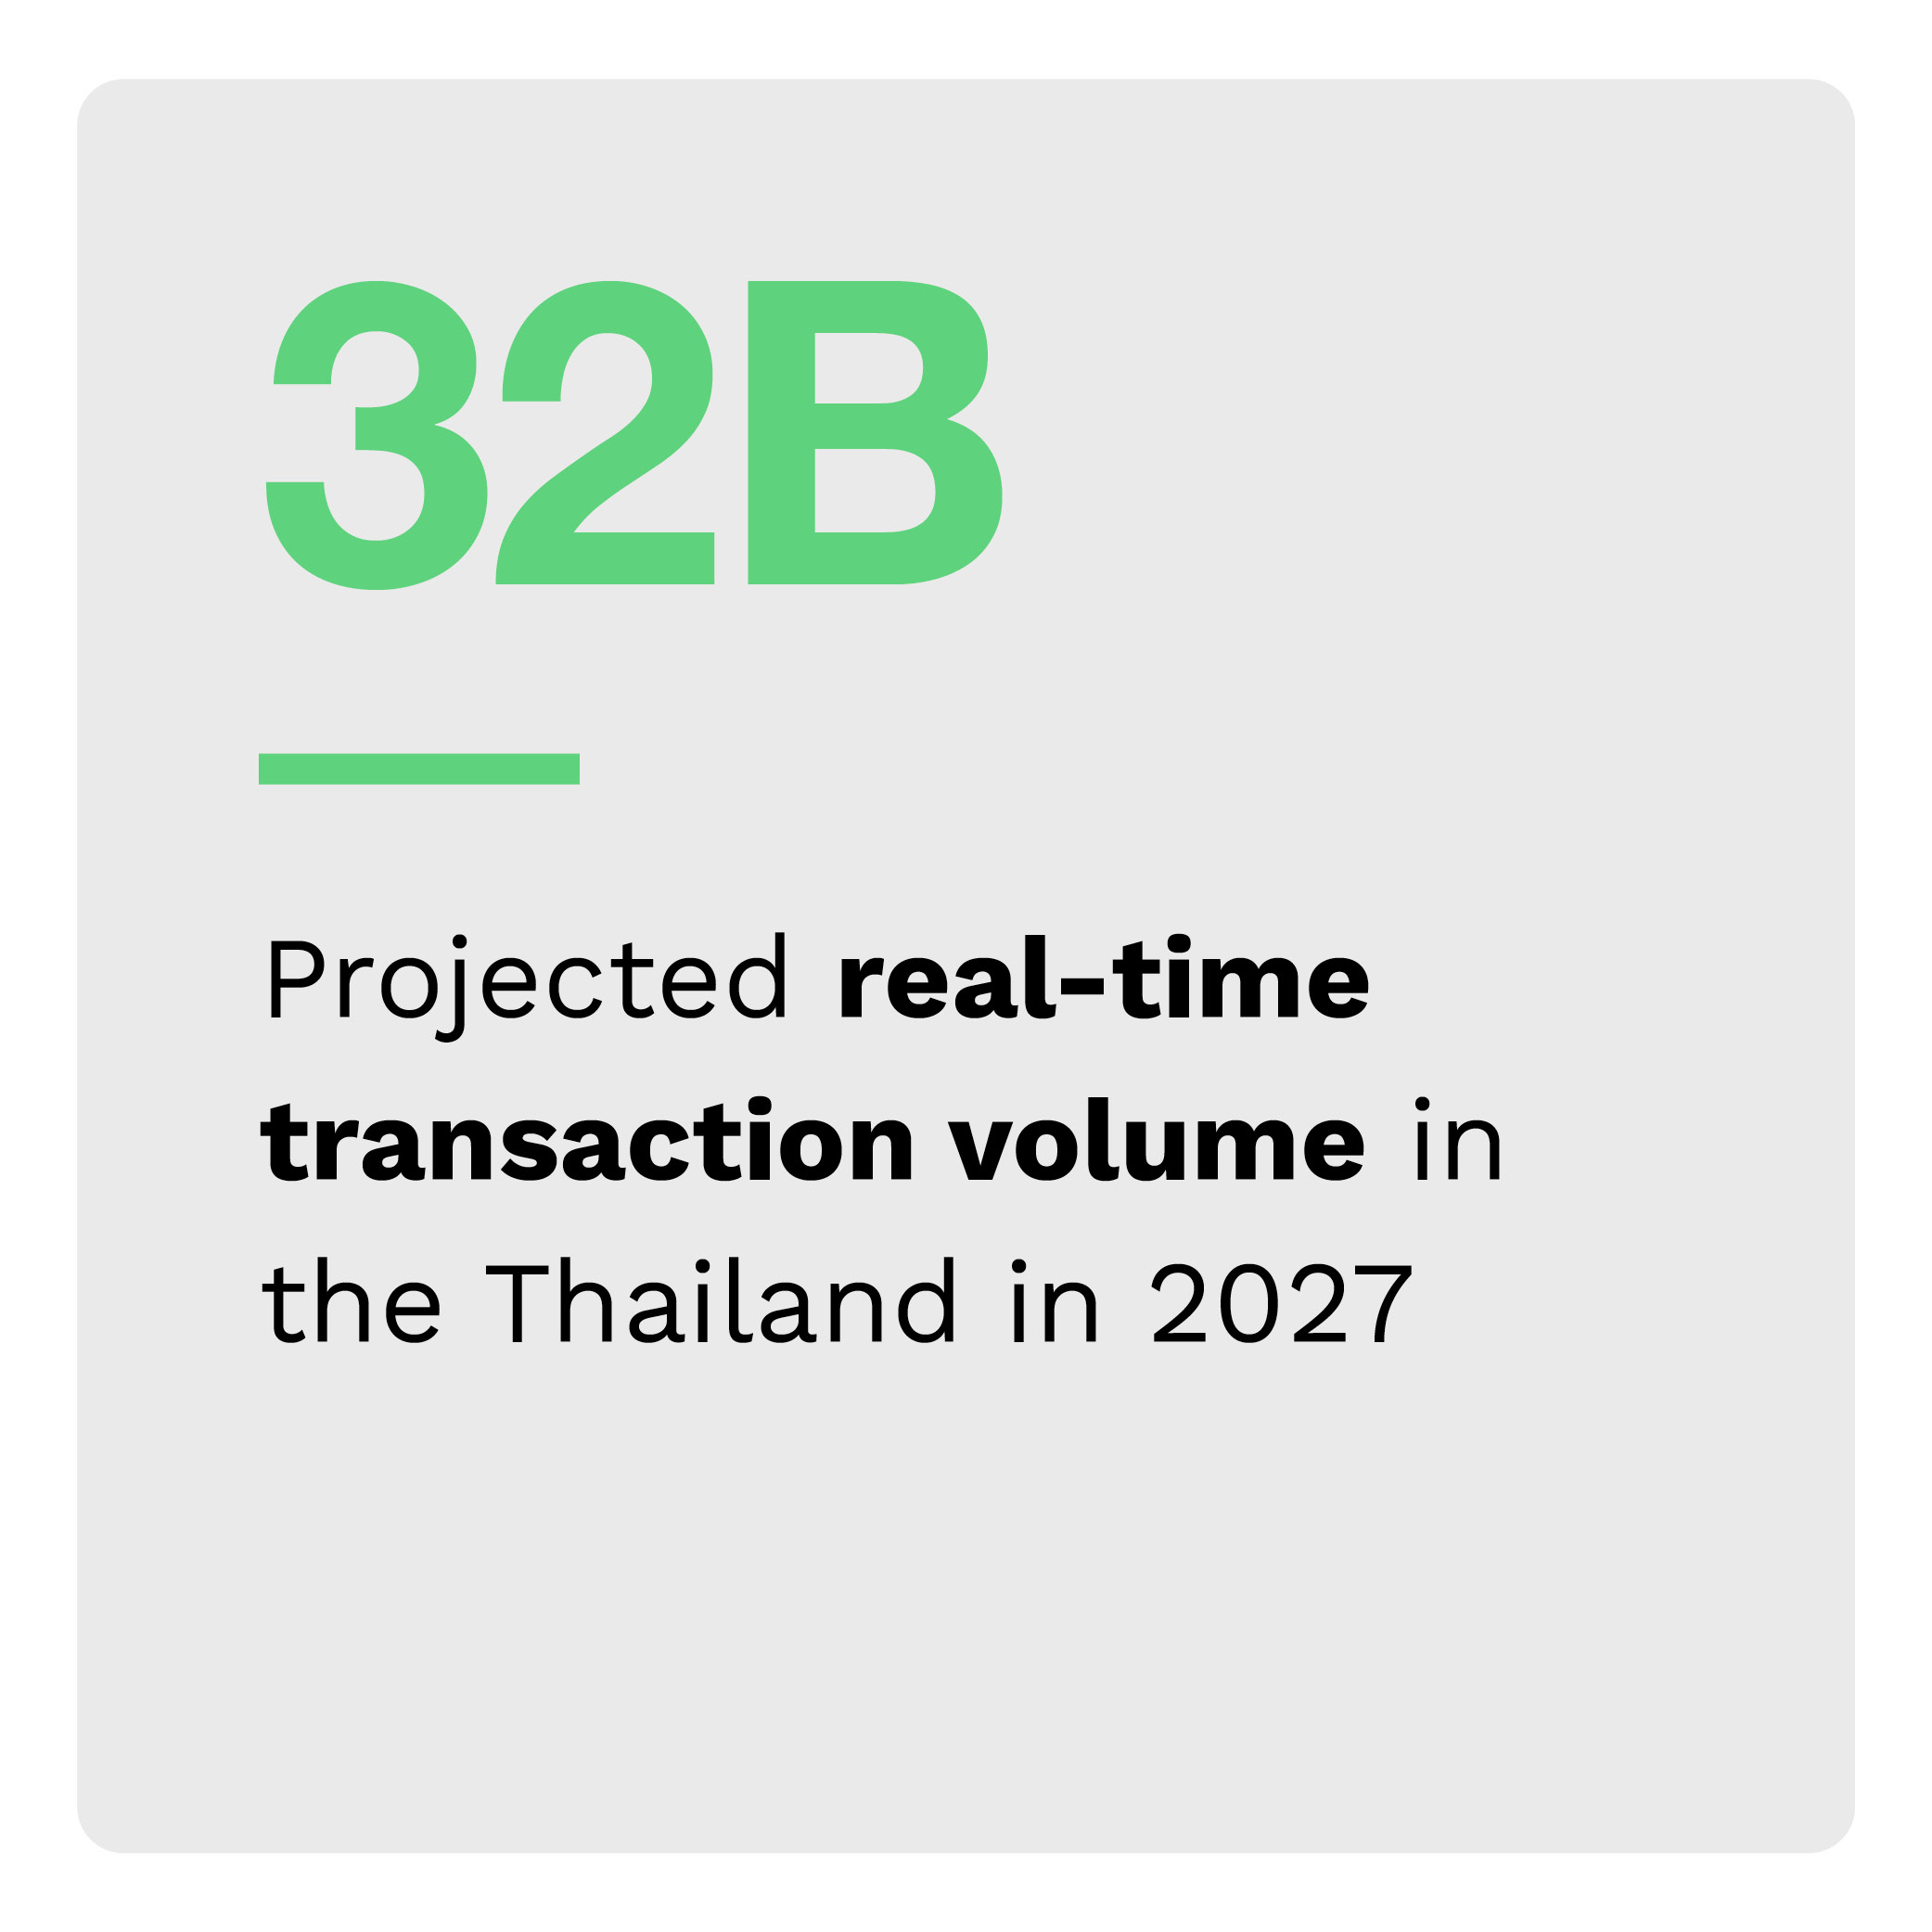 32B: Projected real-time transaction volume in Thailand in 2027